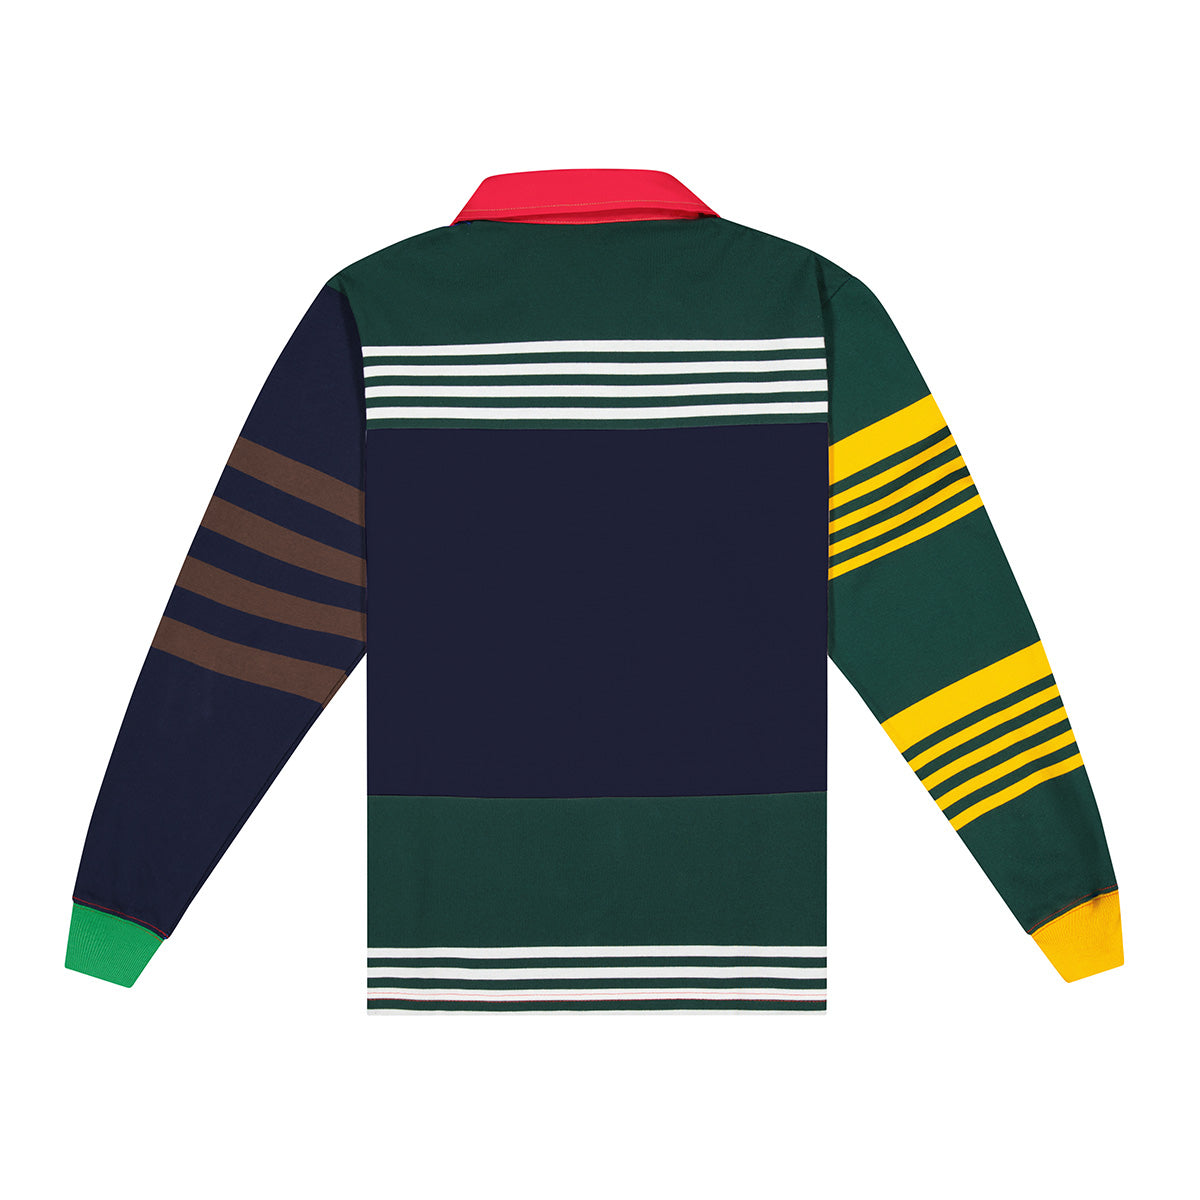 All Sorts Polycotton Jersey - Long Sleeve + Free Rugby Shorts & Socks